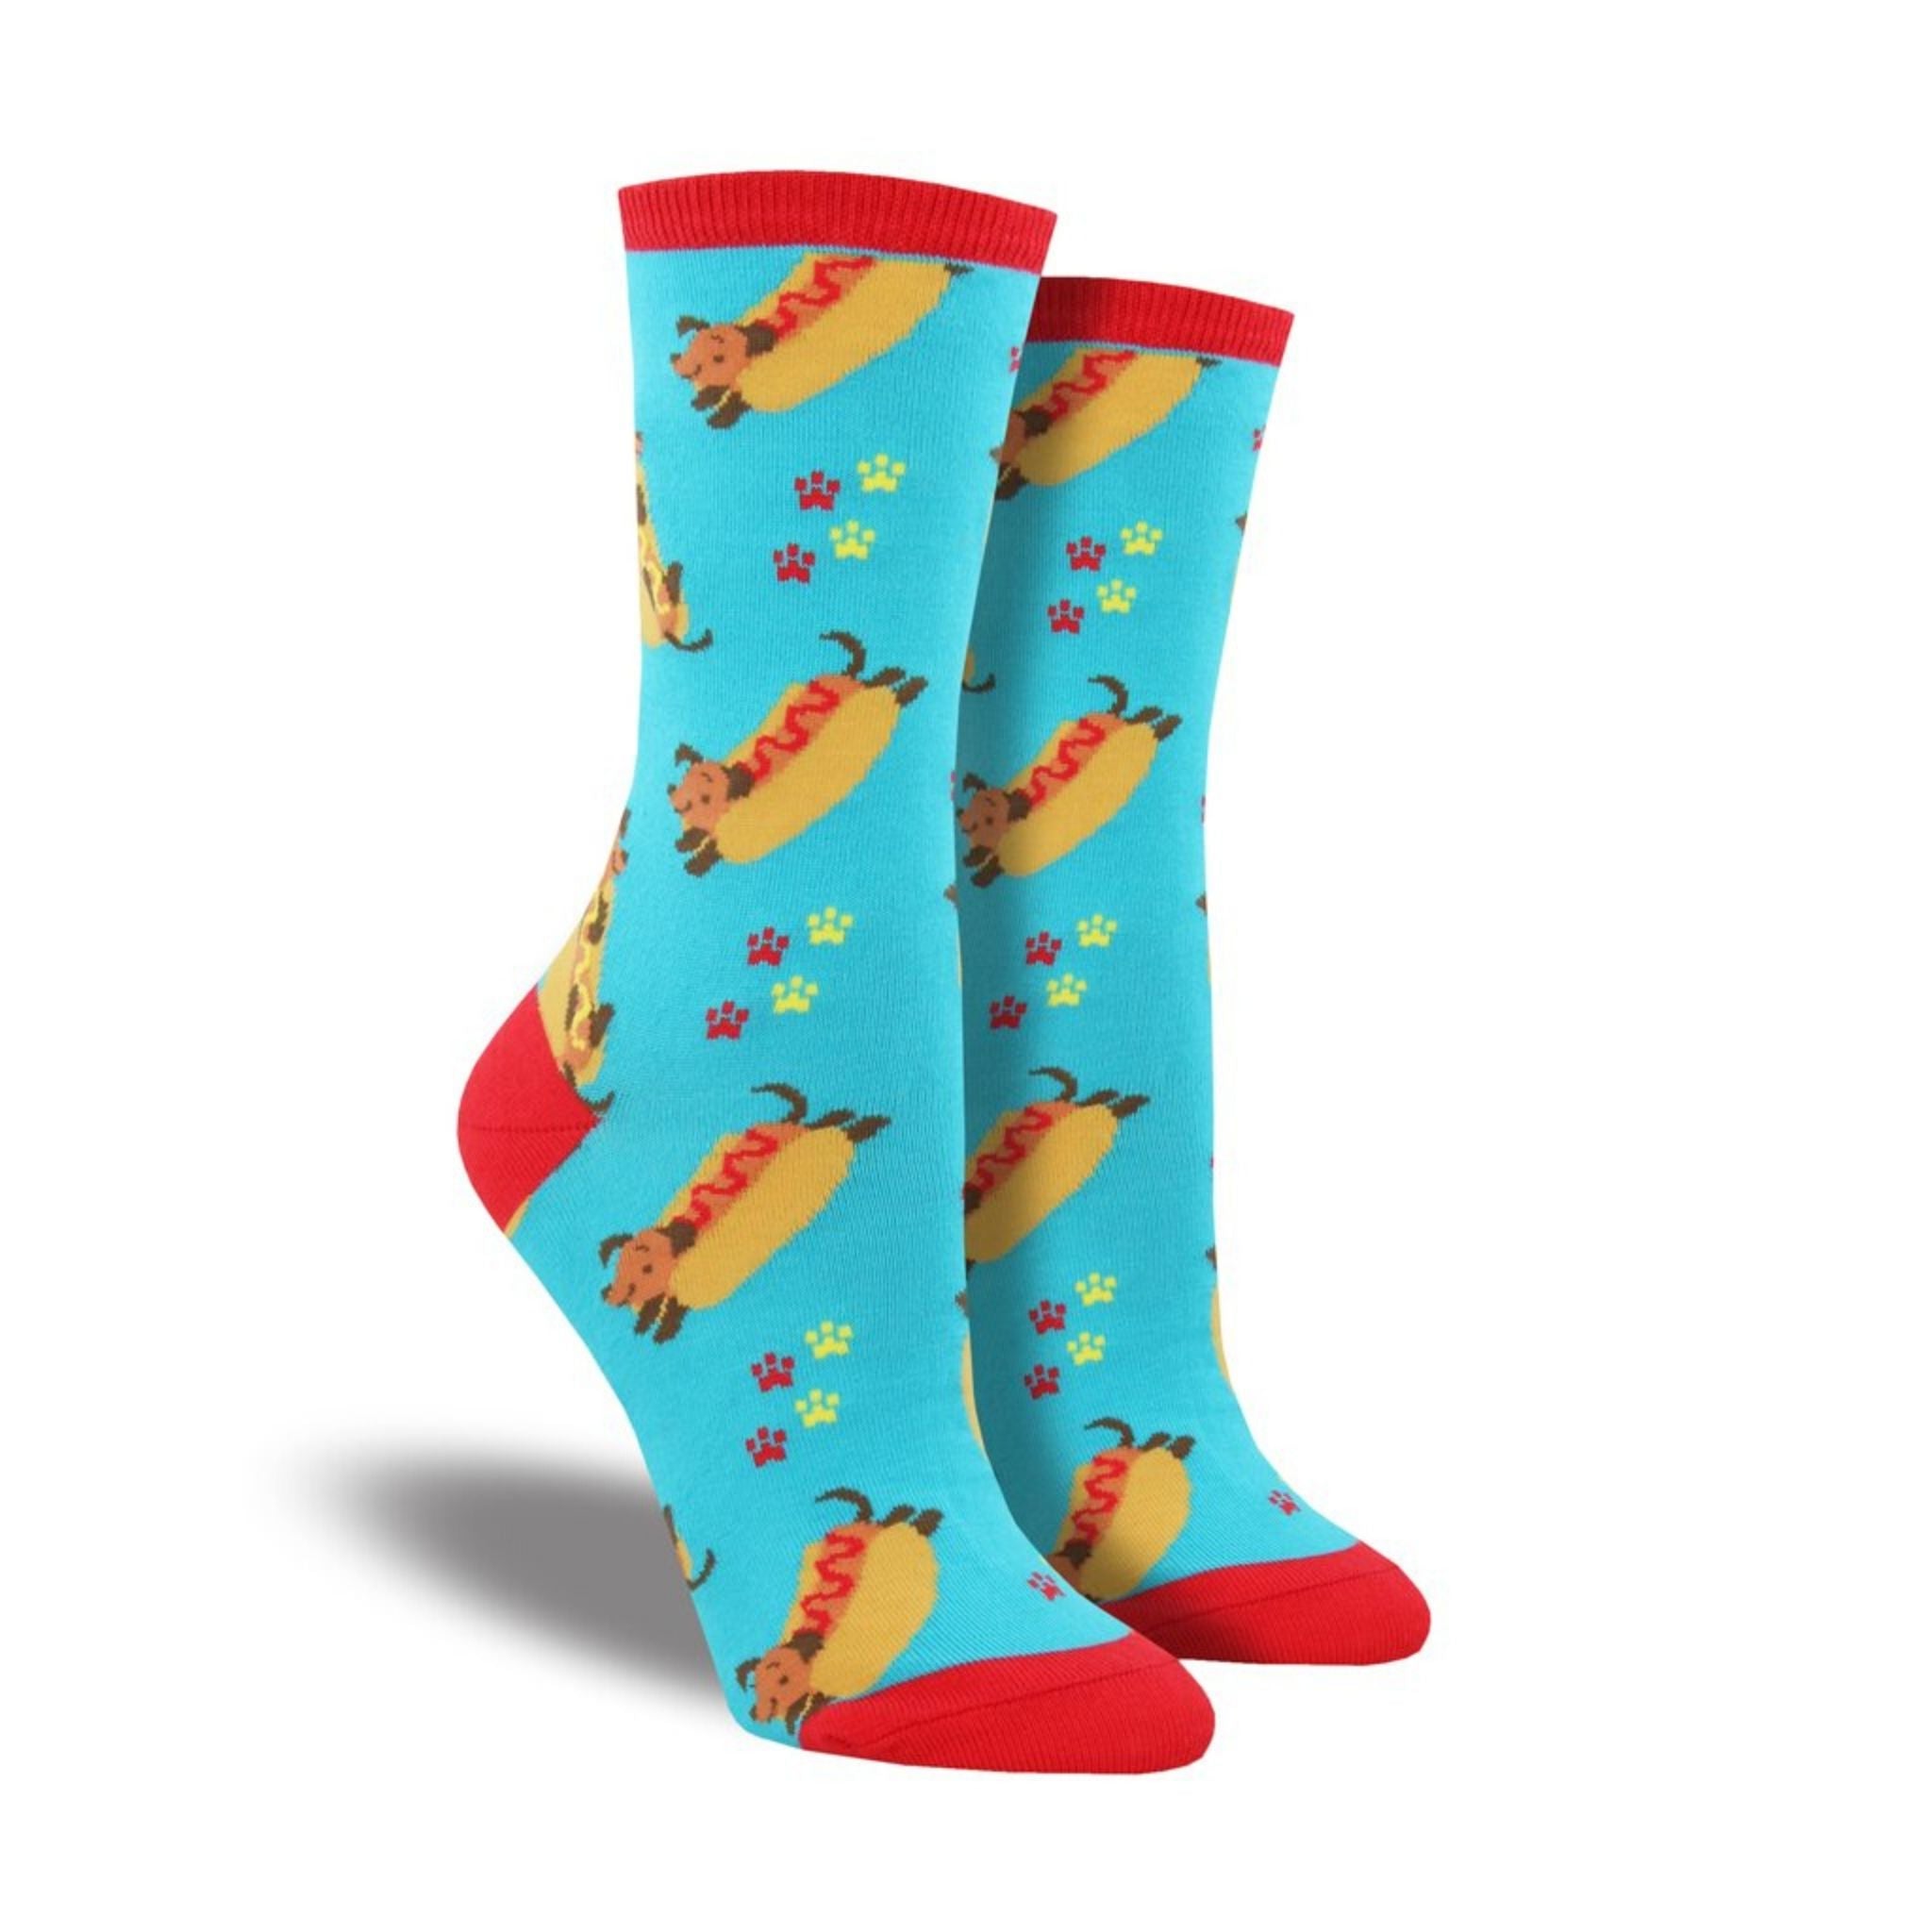 Blue socks with red accents featuring wiener dogs in hot dog buns